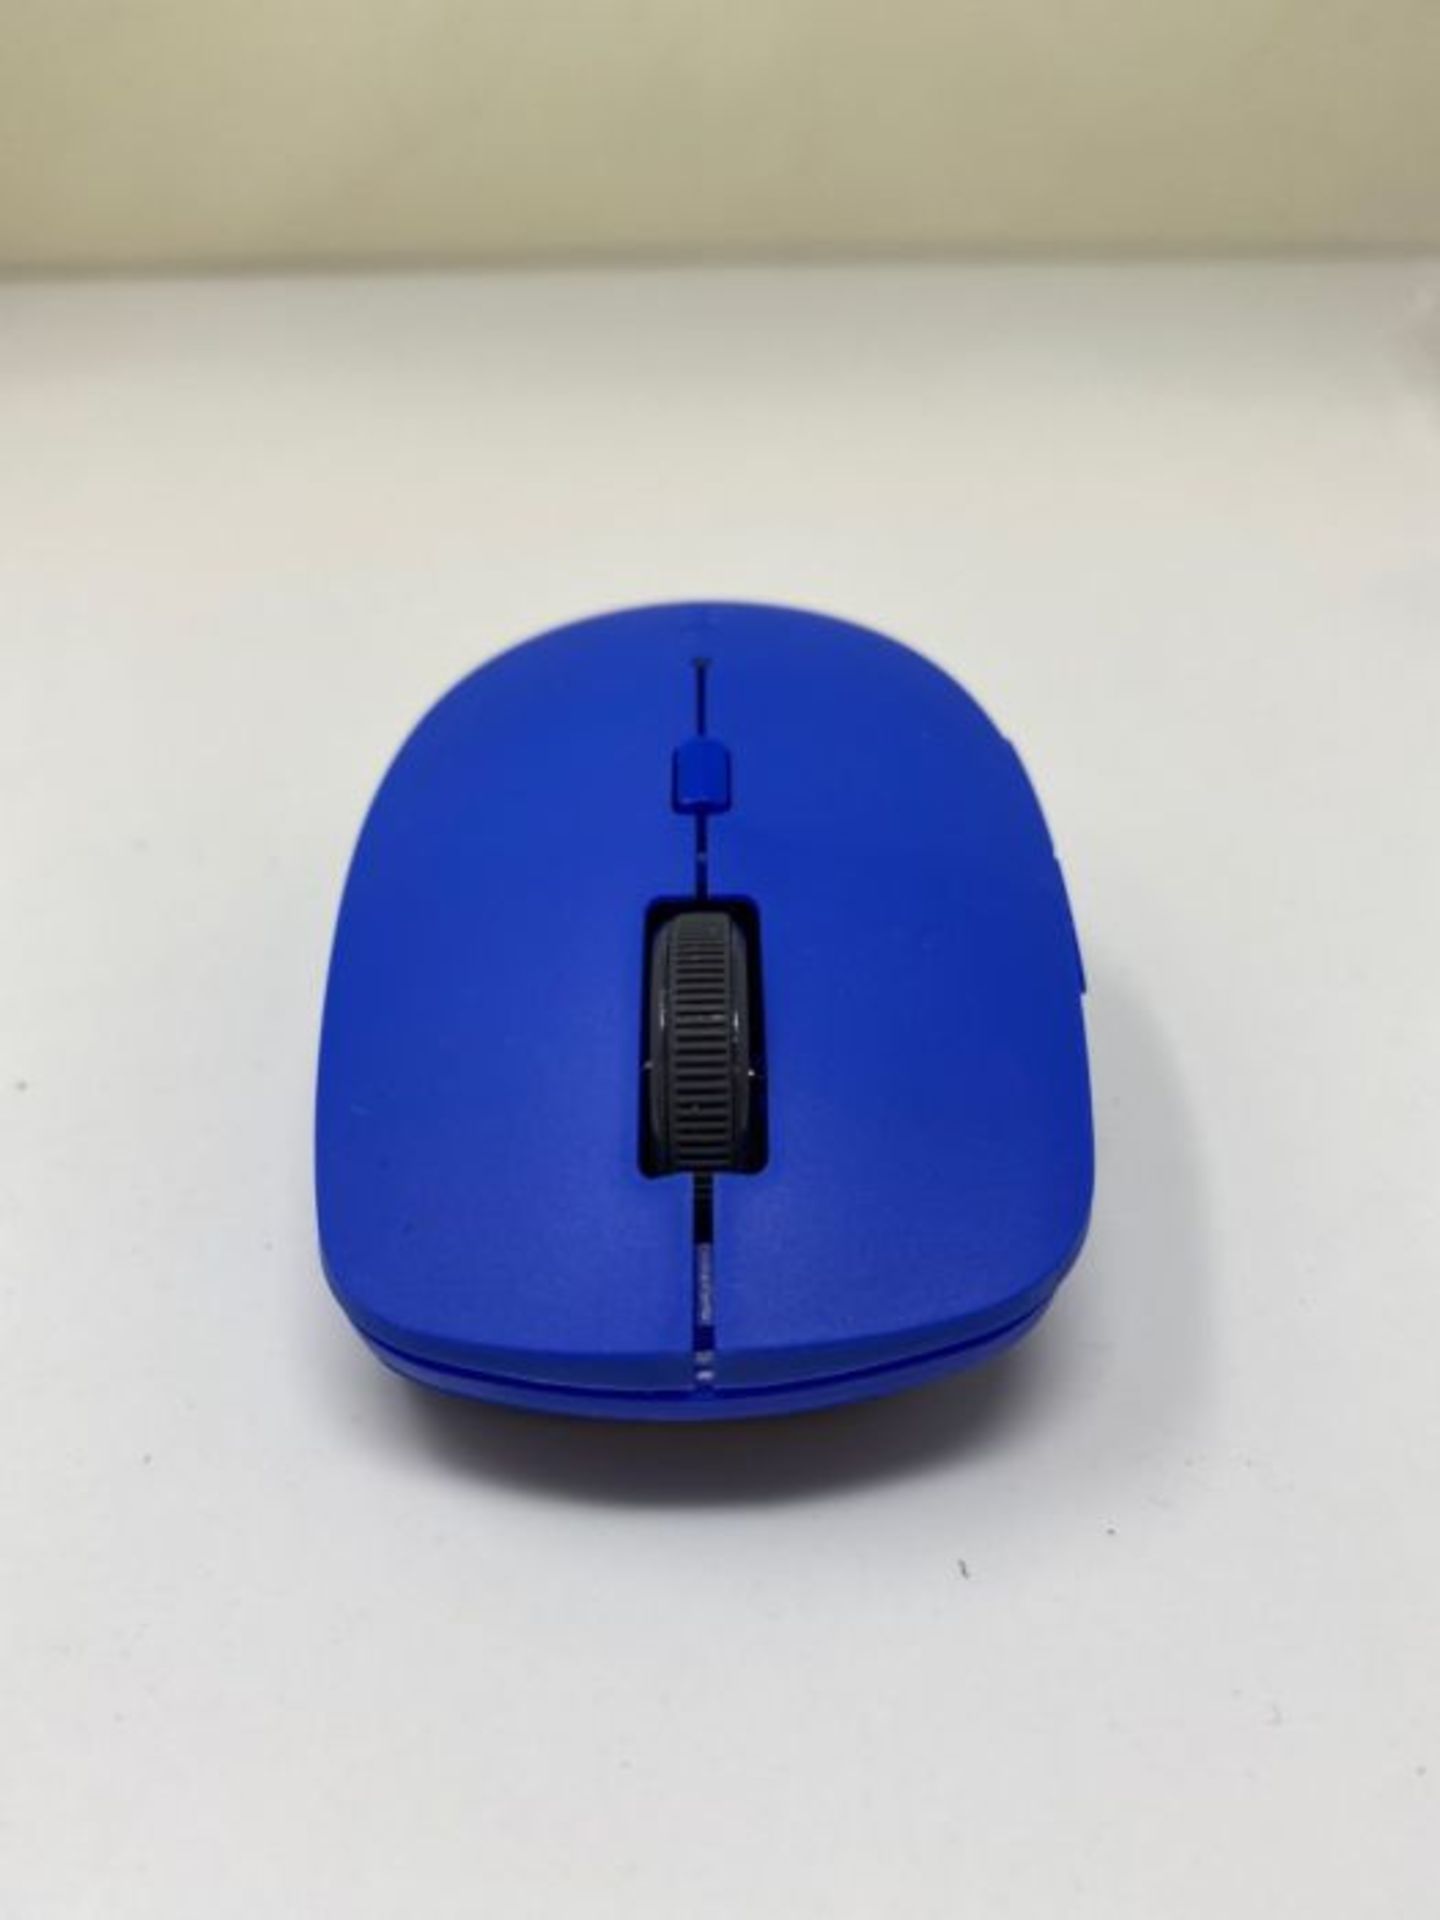 Rapoo M300 Silent Wireless Mouse, Bluetooth and Wireless (2.4 GHz) via USB, Multi-Mode - Image 2 of 2